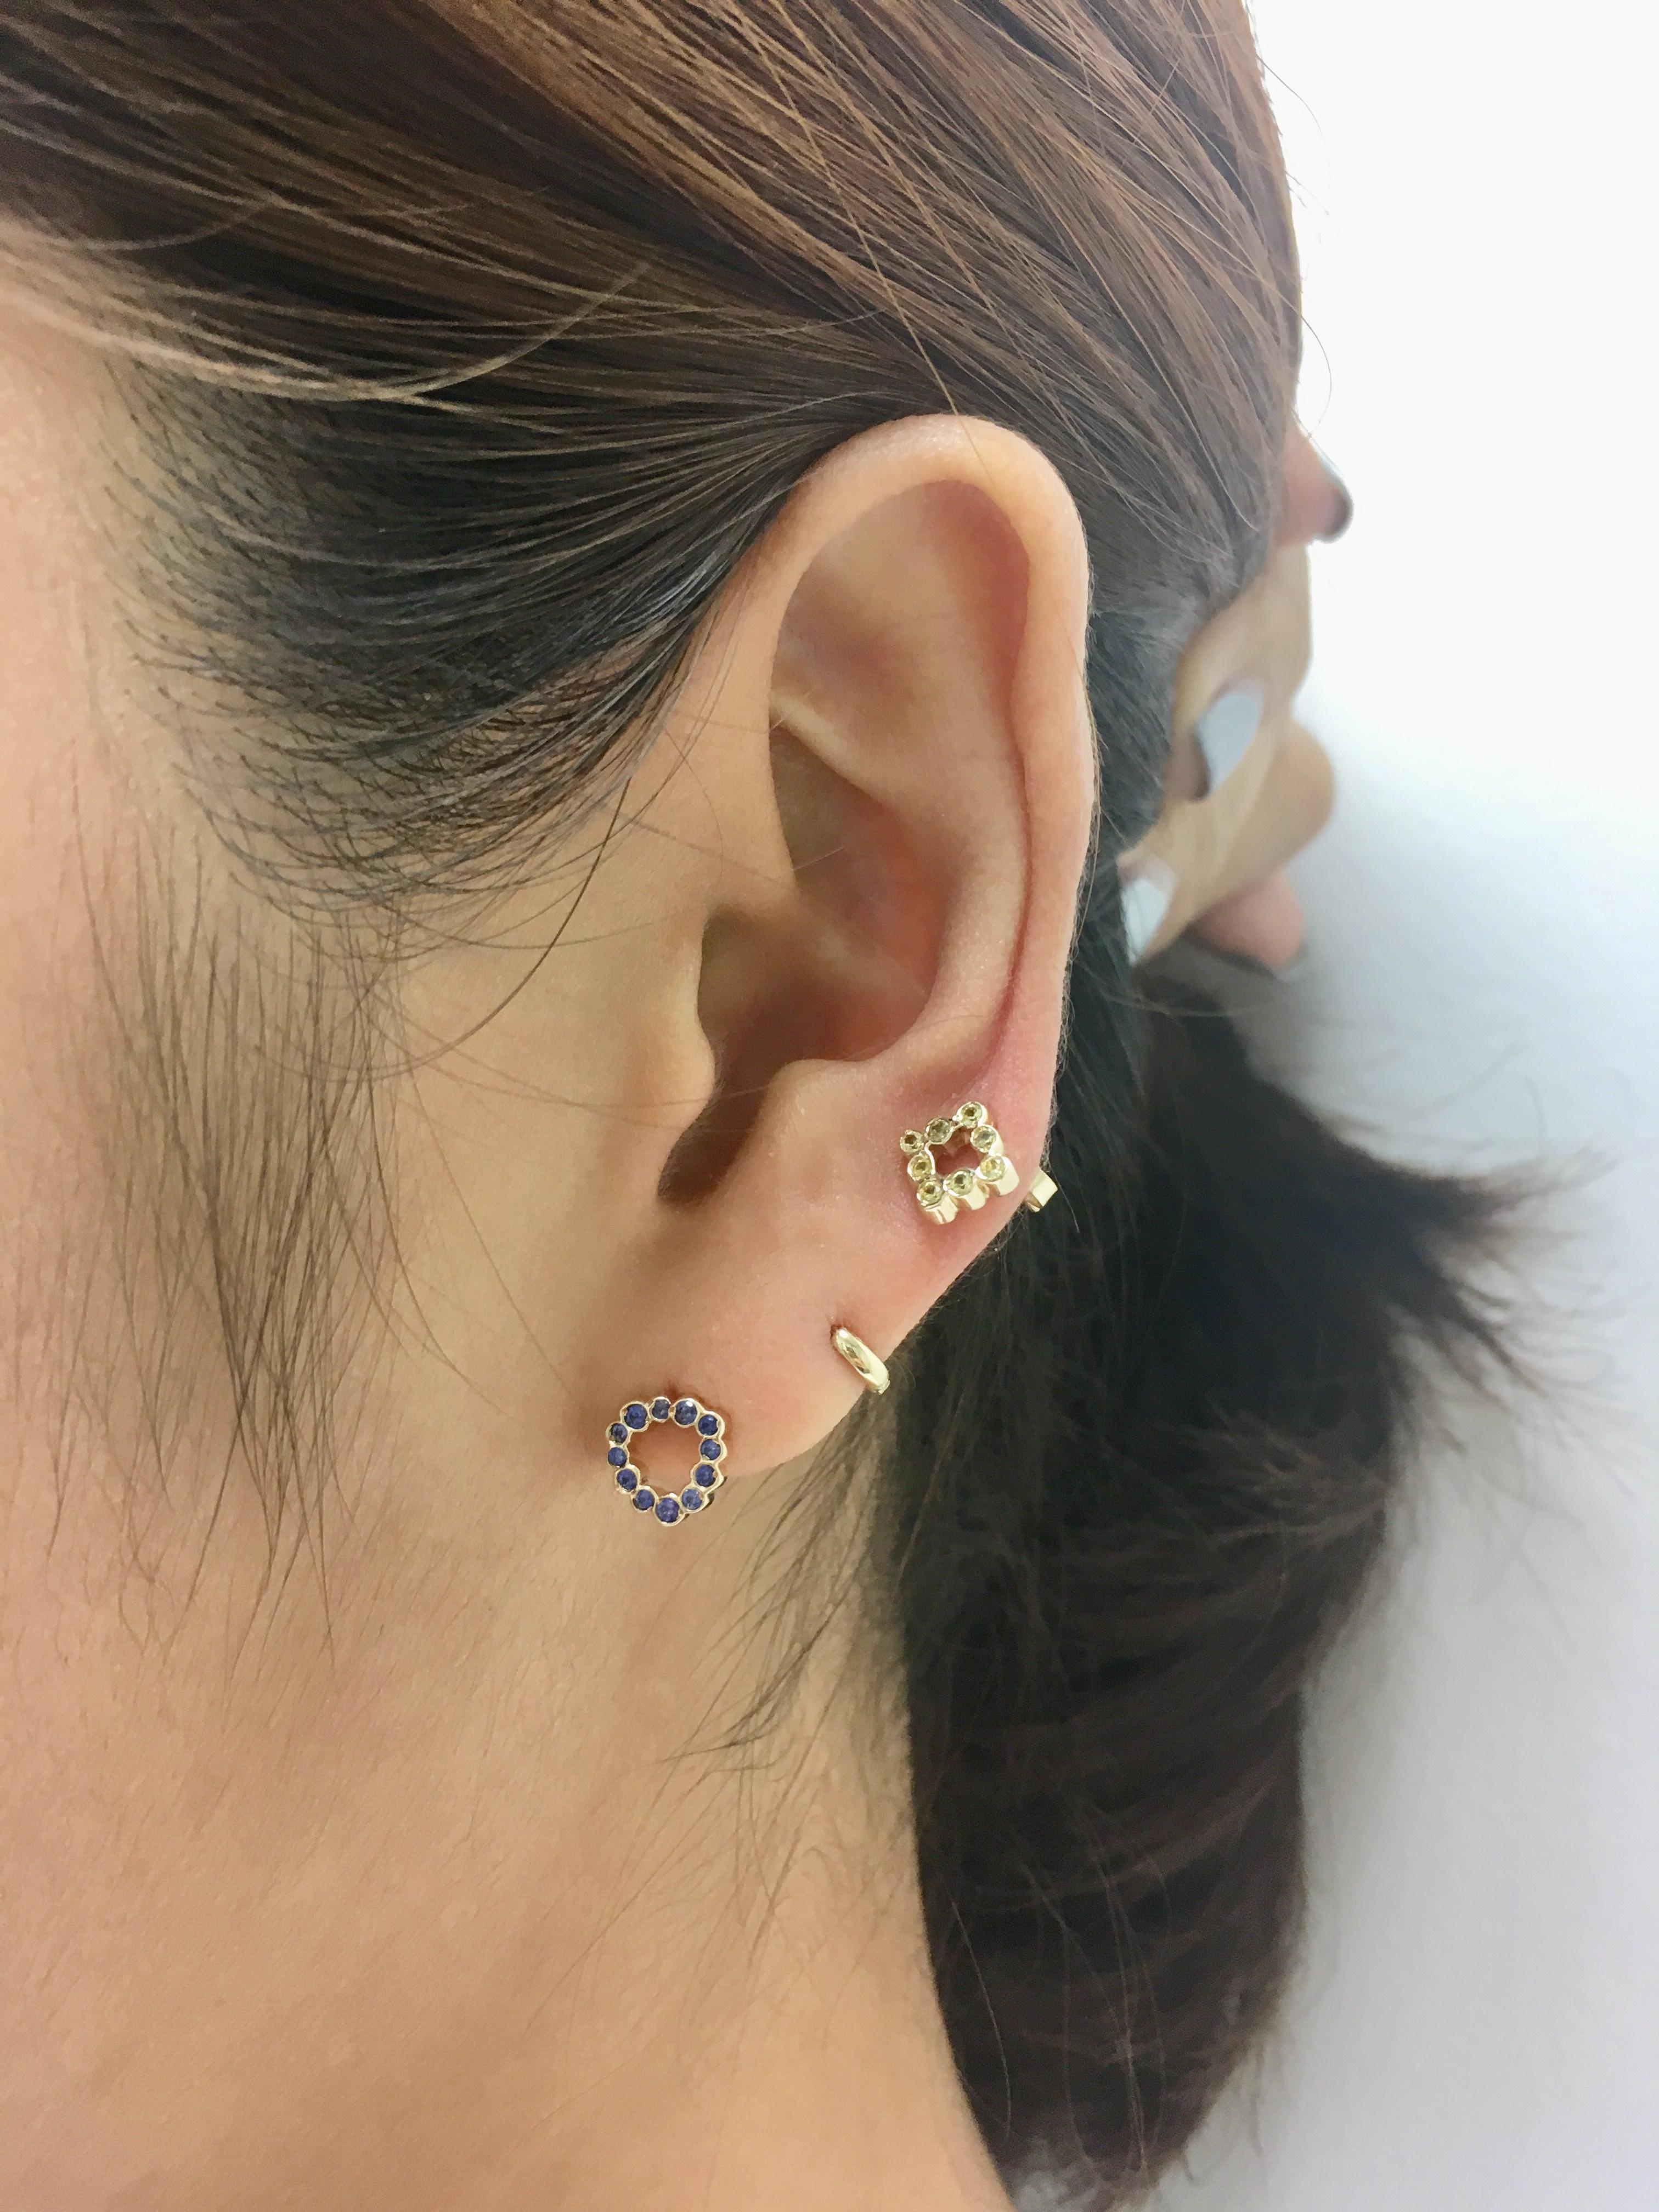 Wear this miniature triangle shaped stud earring with Blue Sapphires for a punch of
color on your ears. Mix and match with your favorite single earrings for a fun mismatched look.

Sold as a Single Earring (not as a pair).

Inspired by seeing the